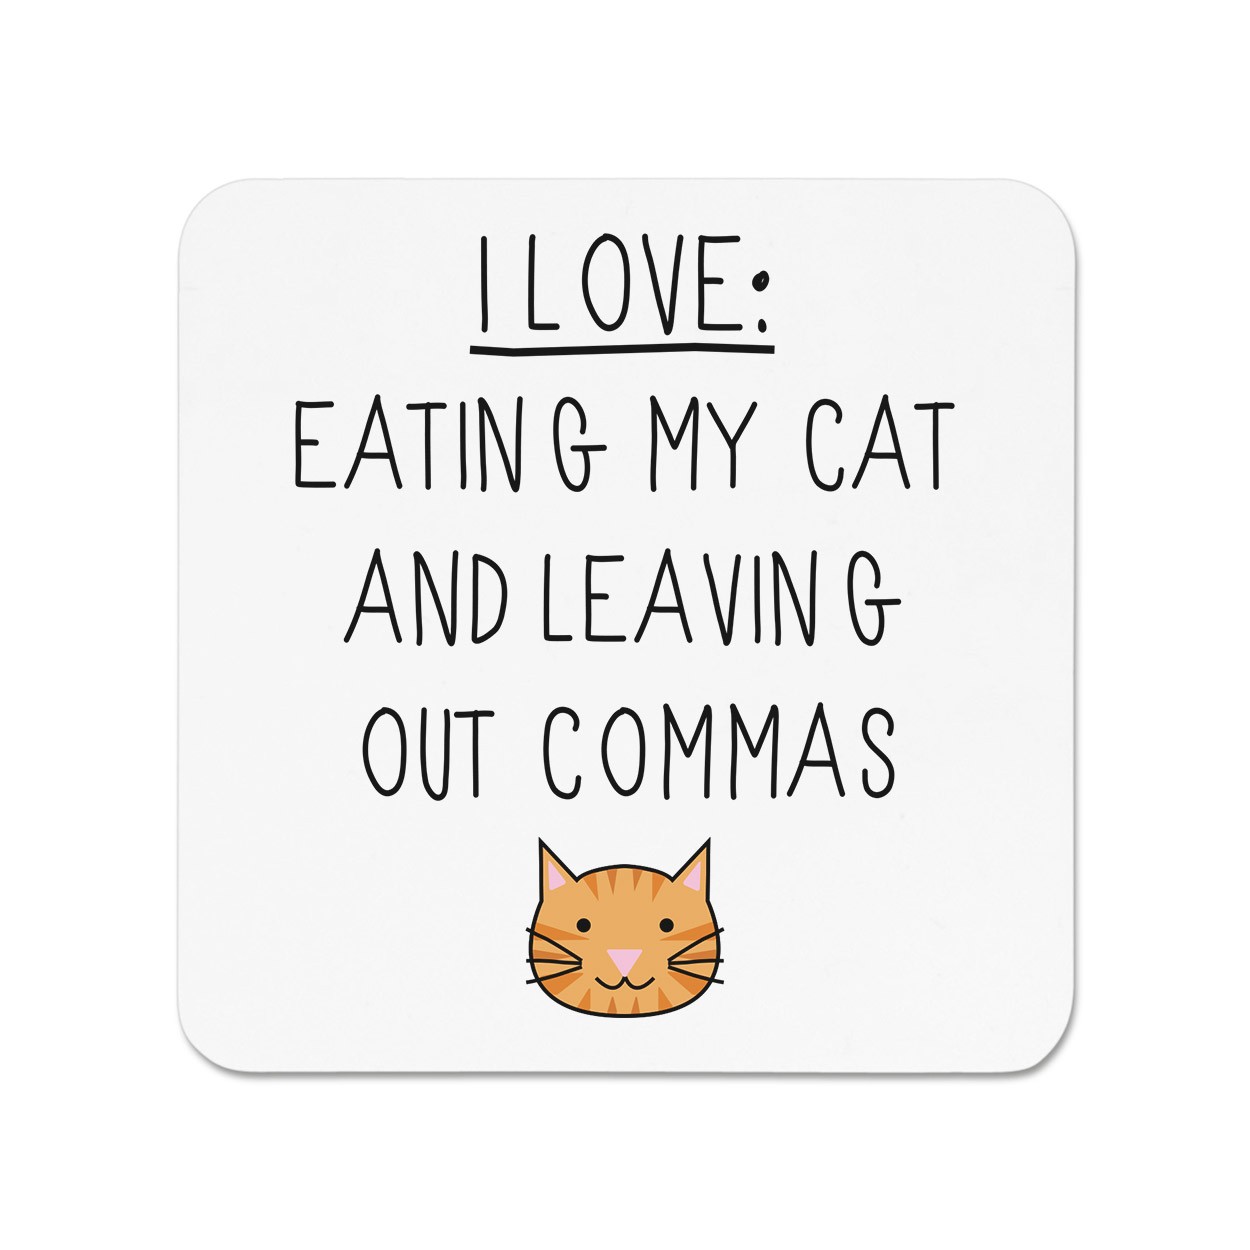 I Love Eating My Cat and Leaving Out Commas Fridge Magnet